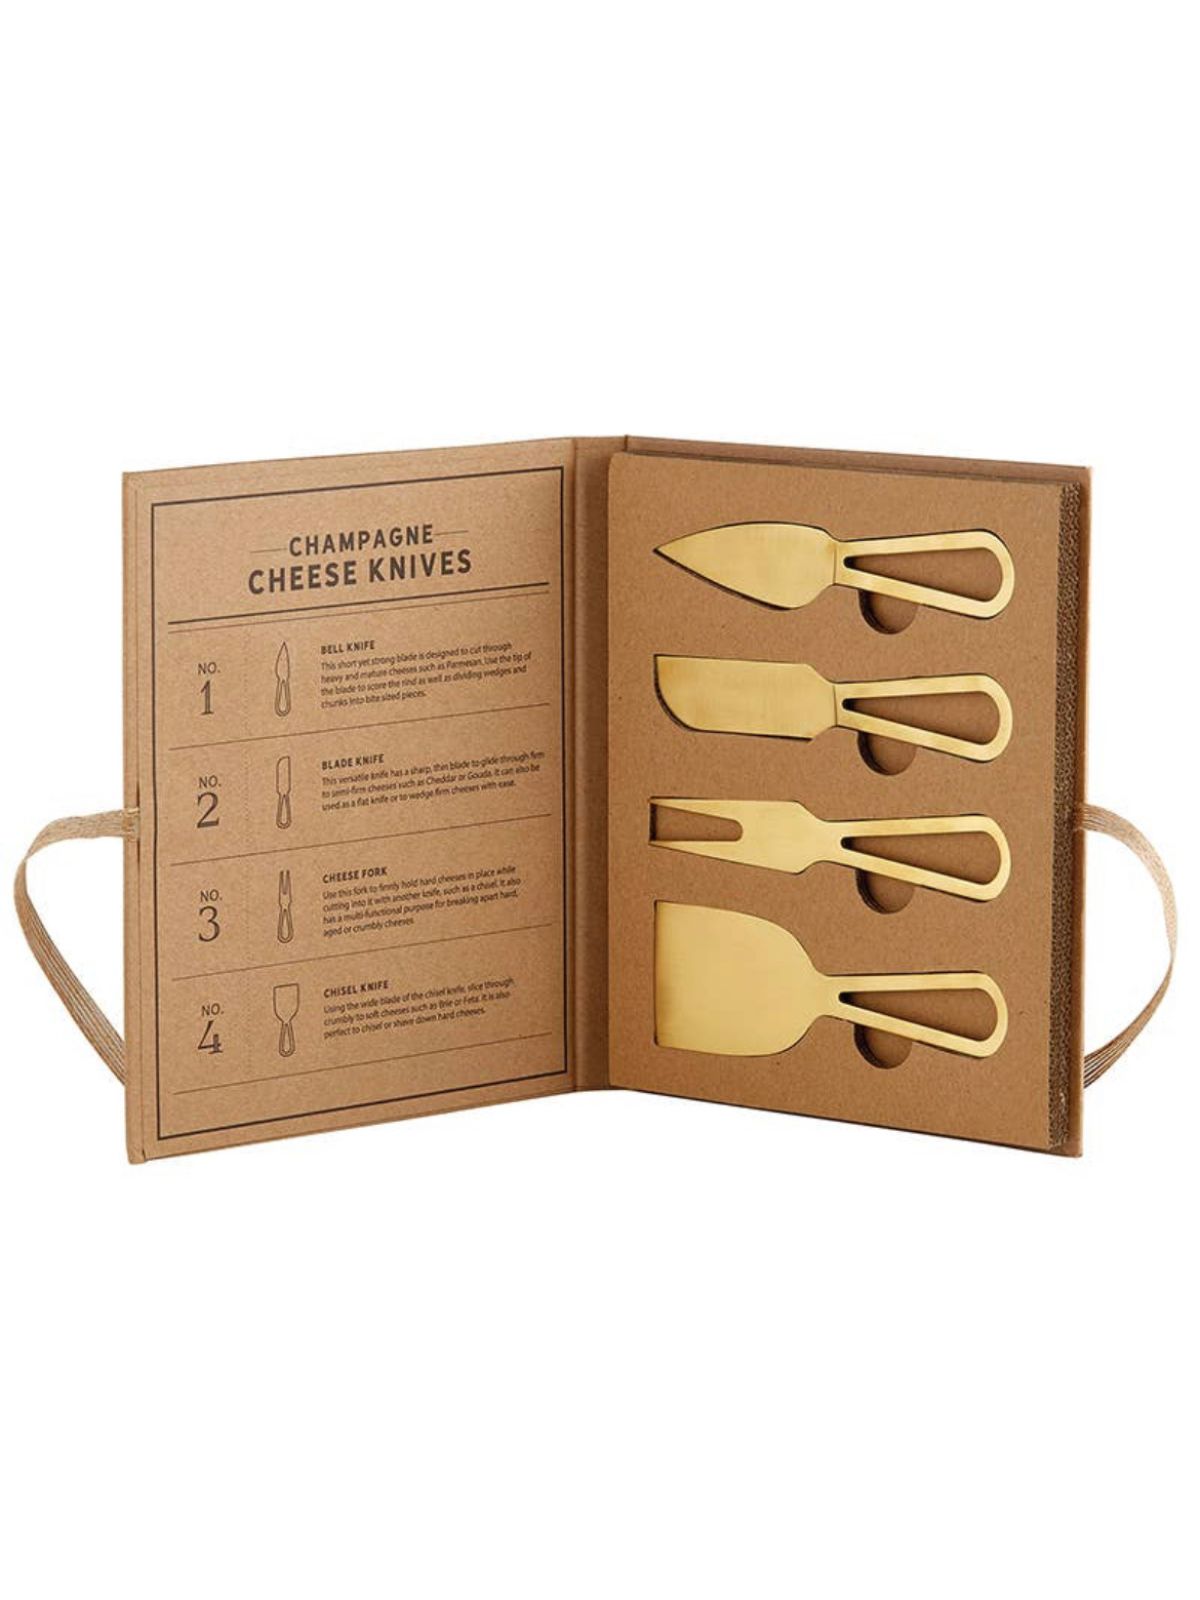 Don't struggle creating your next cheese catering gathering with these Champagne stainless steel Gold Cheese Knives. These Beautiful gold knives are available at KYA Home Decor